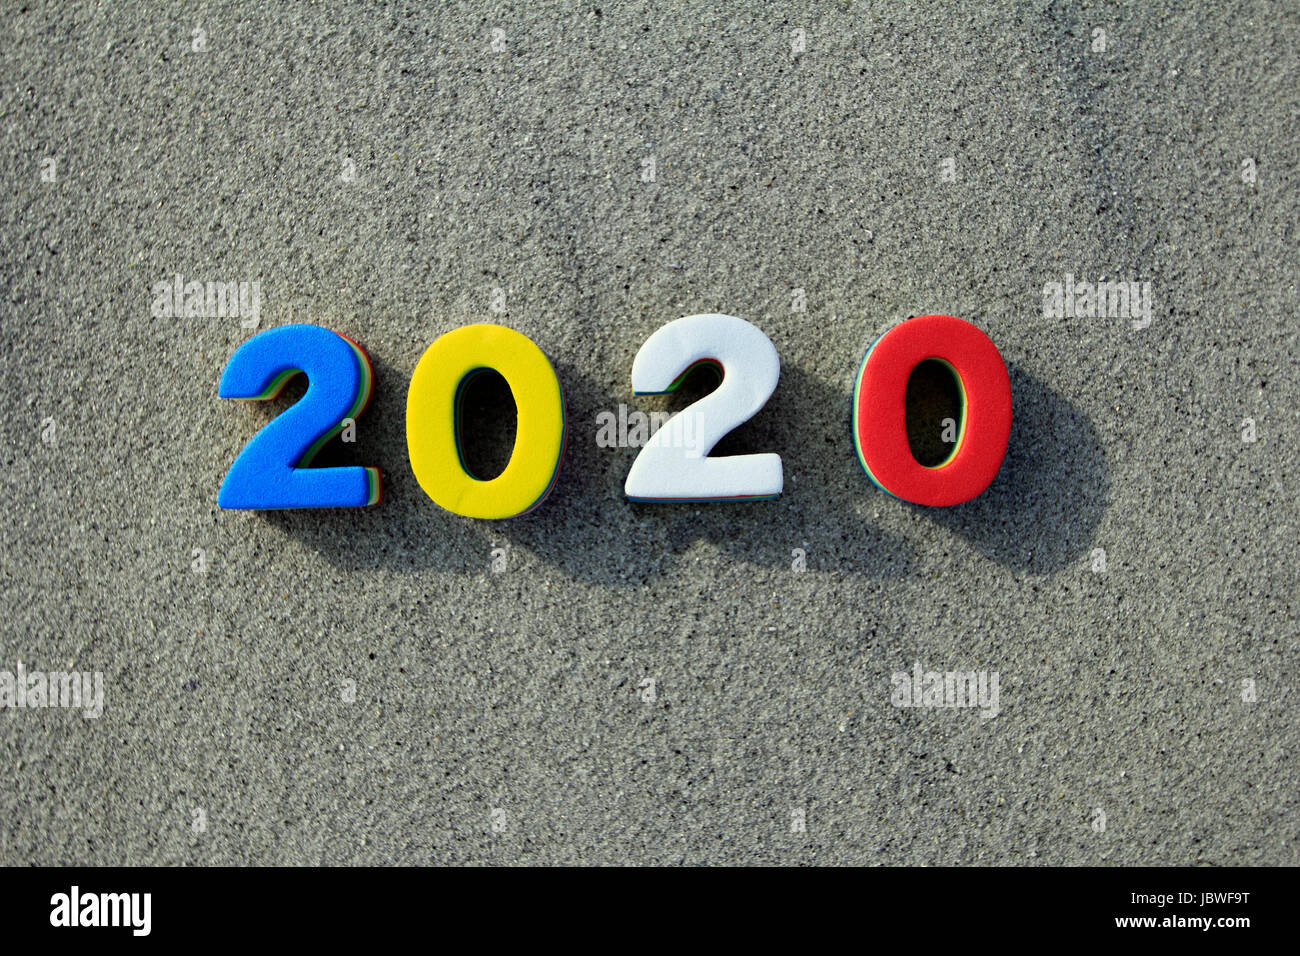 Year 2020 marked with toy numbers on a sandy beach Stock Photo